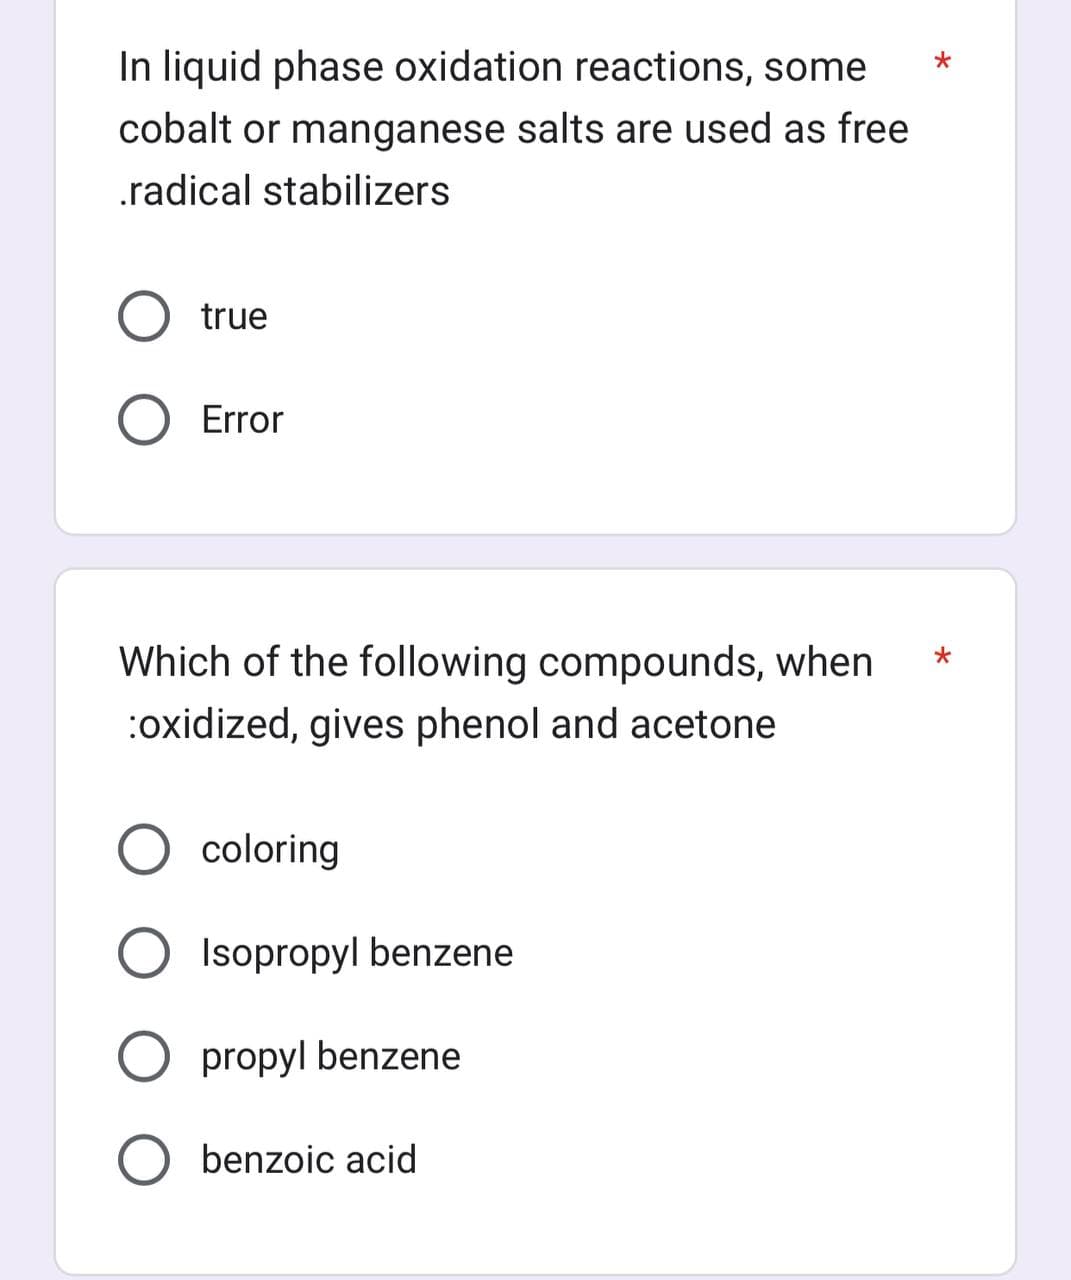 In liquid phase oxidation reactions, some
cobalt or manganese salts are used as free
.radical stabilizers
O true
Error
Which of the following compounds, when
:oxidized, gives phenol and acetone
coloring
Isopropyl benzene
O propyl benzene
benzoic acid
*